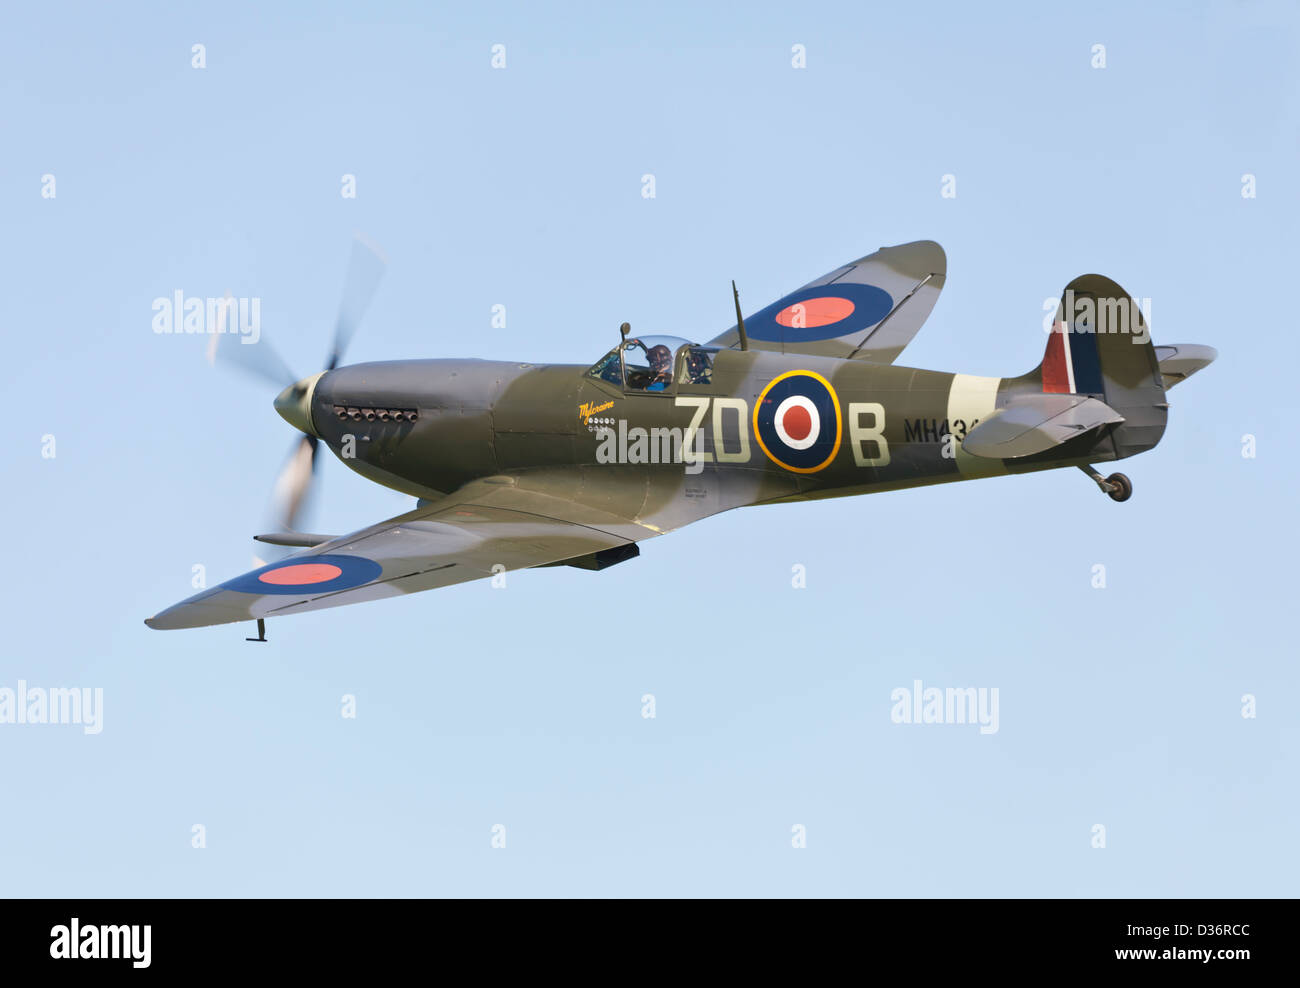 Spitfire mk9 owned by the old flying machine company based at Duxford performs a flypast. Stock Photo